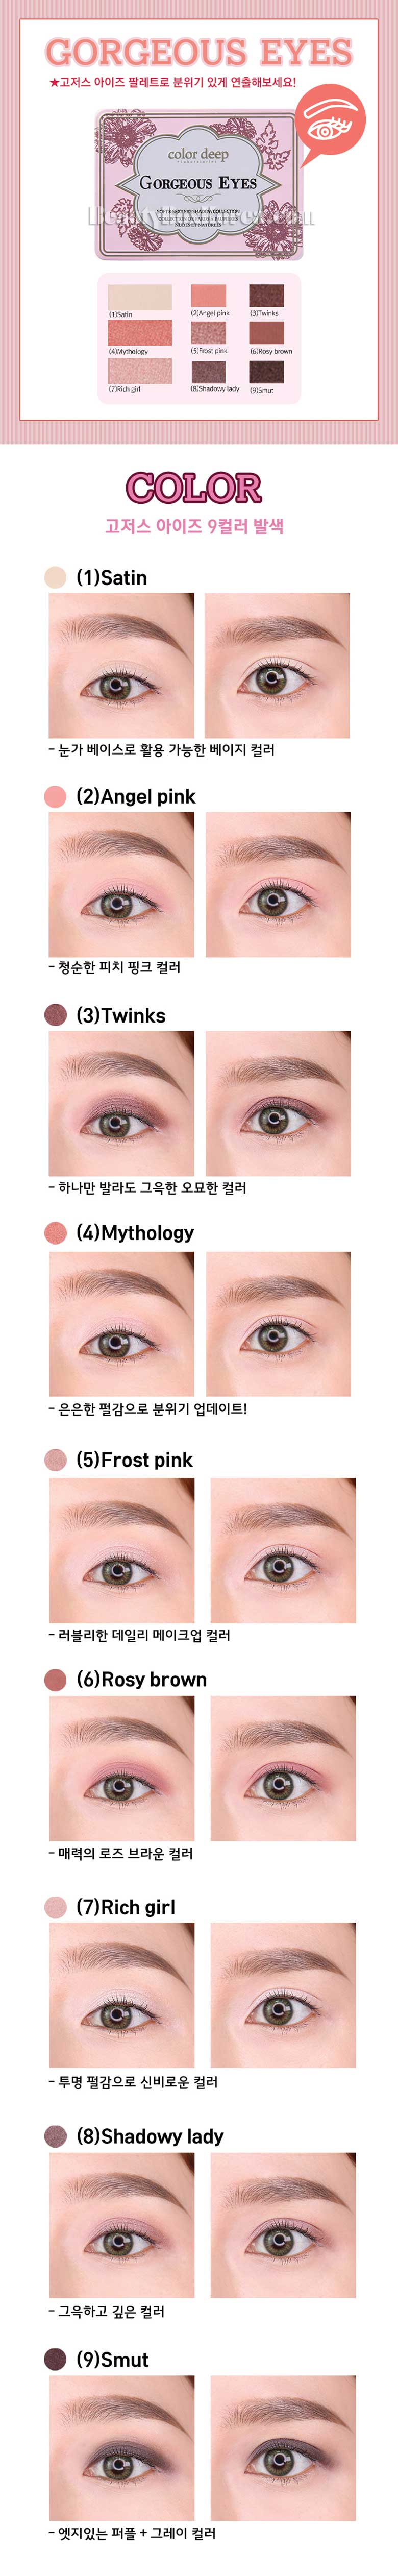 Color Deep 9 Color Gorgeous Eyes Eyeshdow Palette 10 2g Best Price And Fast Shipping From Beauty Box Korea